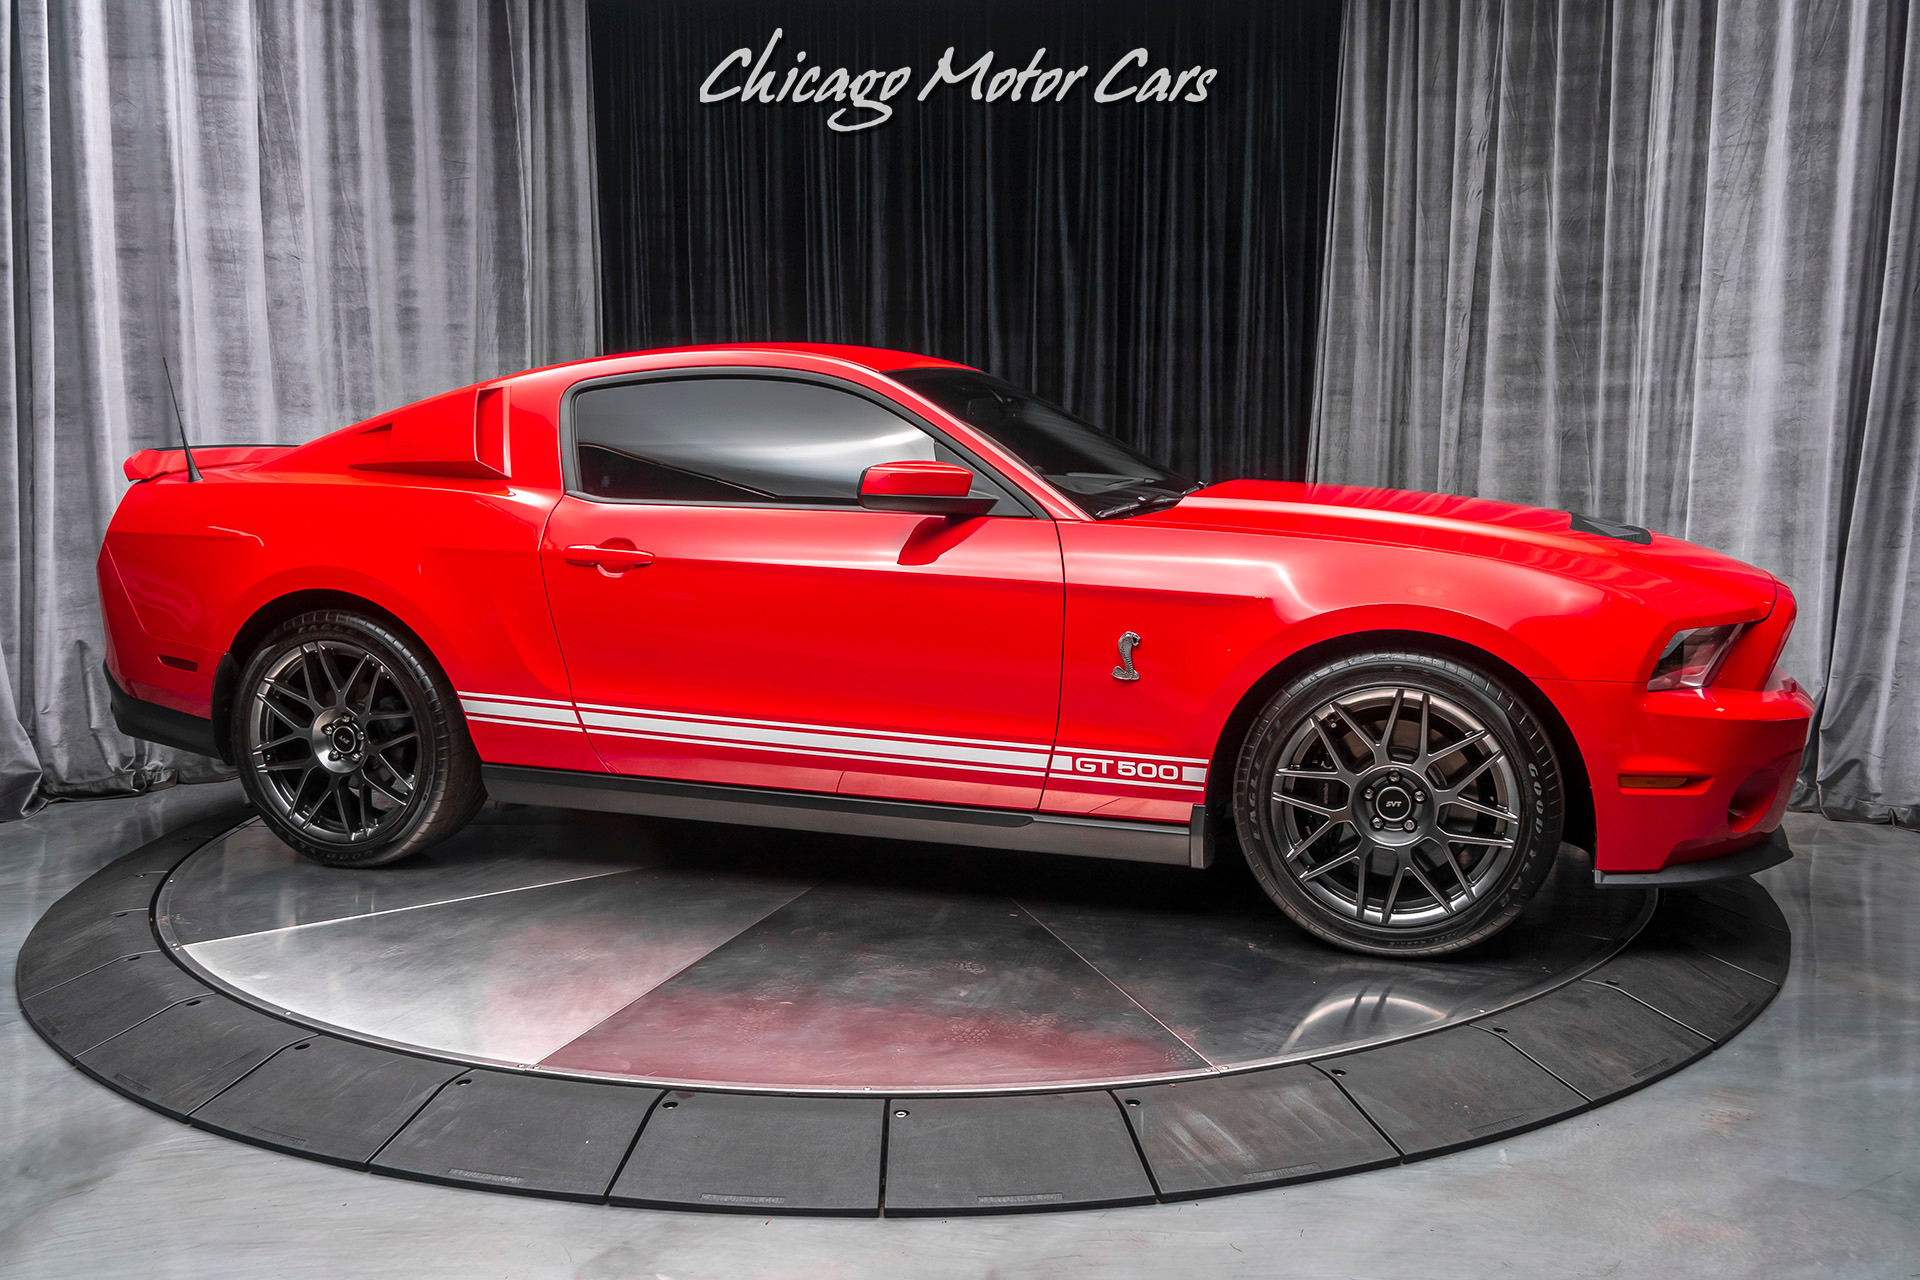 Used 2012 Ford Mustang Mustang Shelby Gt500 54l Supercharged Only 6k